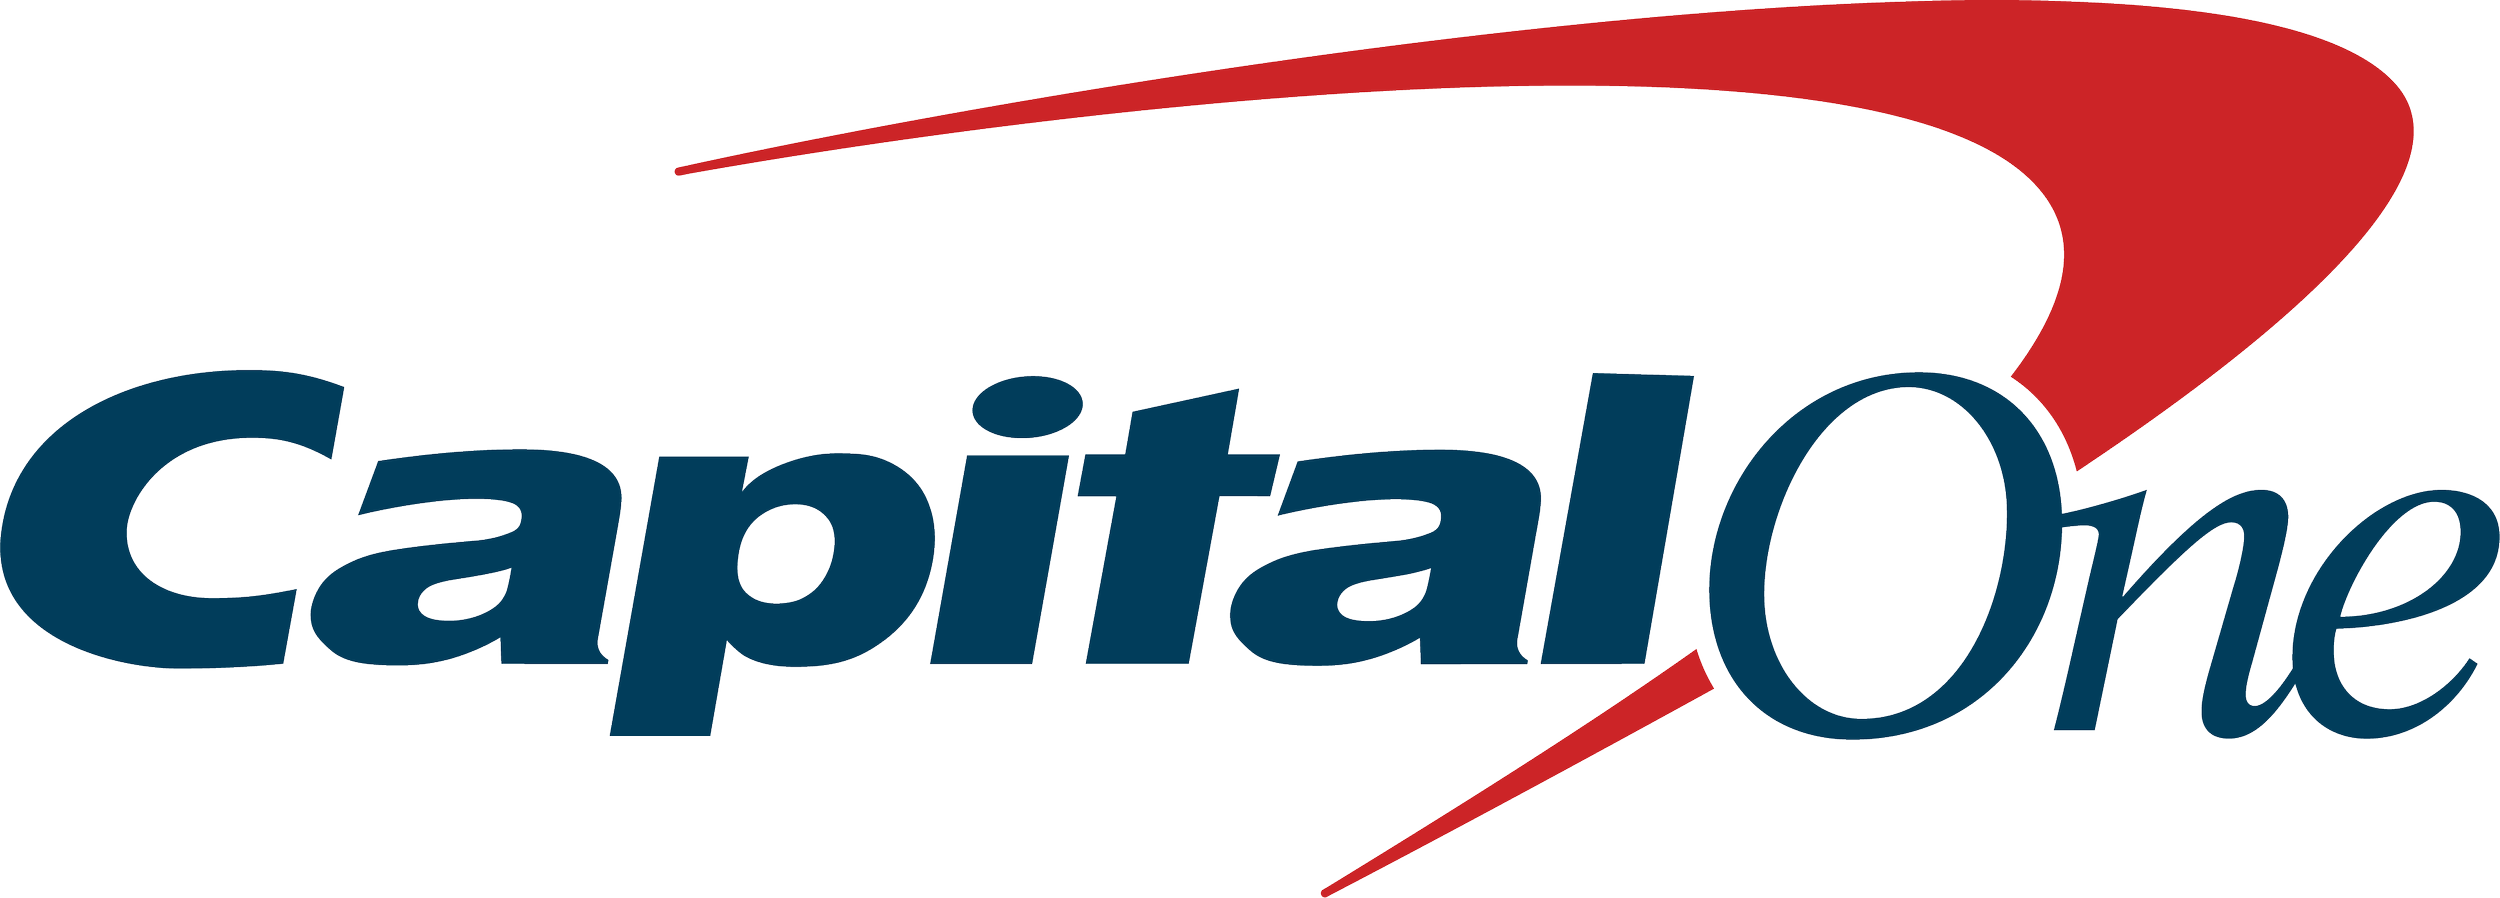 Updated Capital One Logo.png